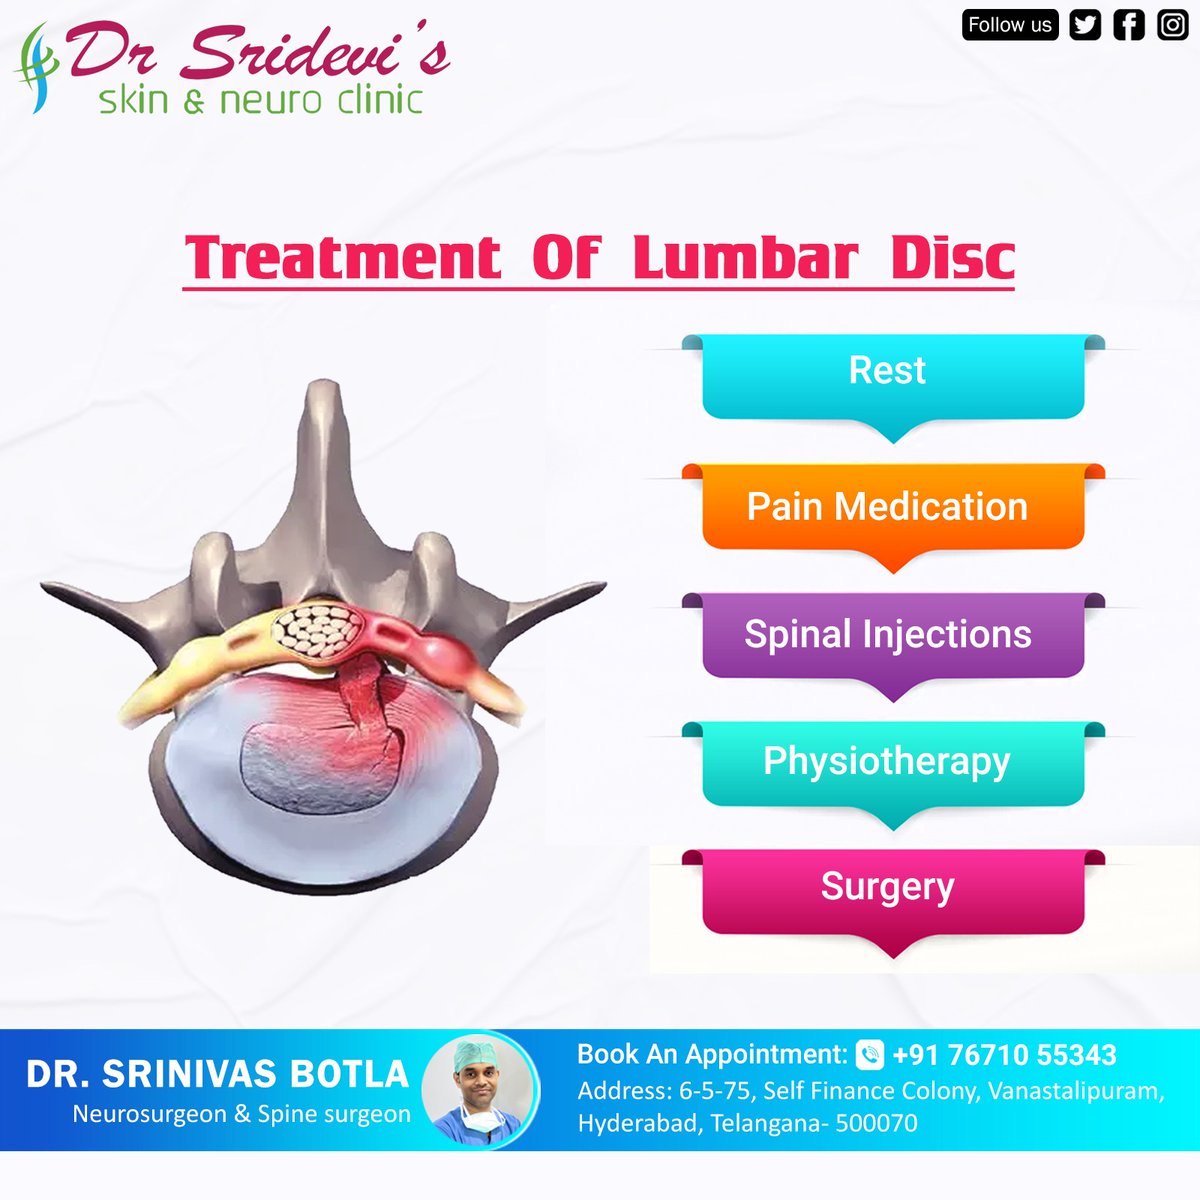 Treatment with #Rest, #Painmedication, #SpinalInjections, and #Physical Therapy 
is the first step to recovery from #LumbarDisk.

Meet our expert for best treatment
#drsrinivasbotla #skin&neuroclinic #neurosurgeon #yashodahospital #malakpet #spinesurgeon #neurosurgery